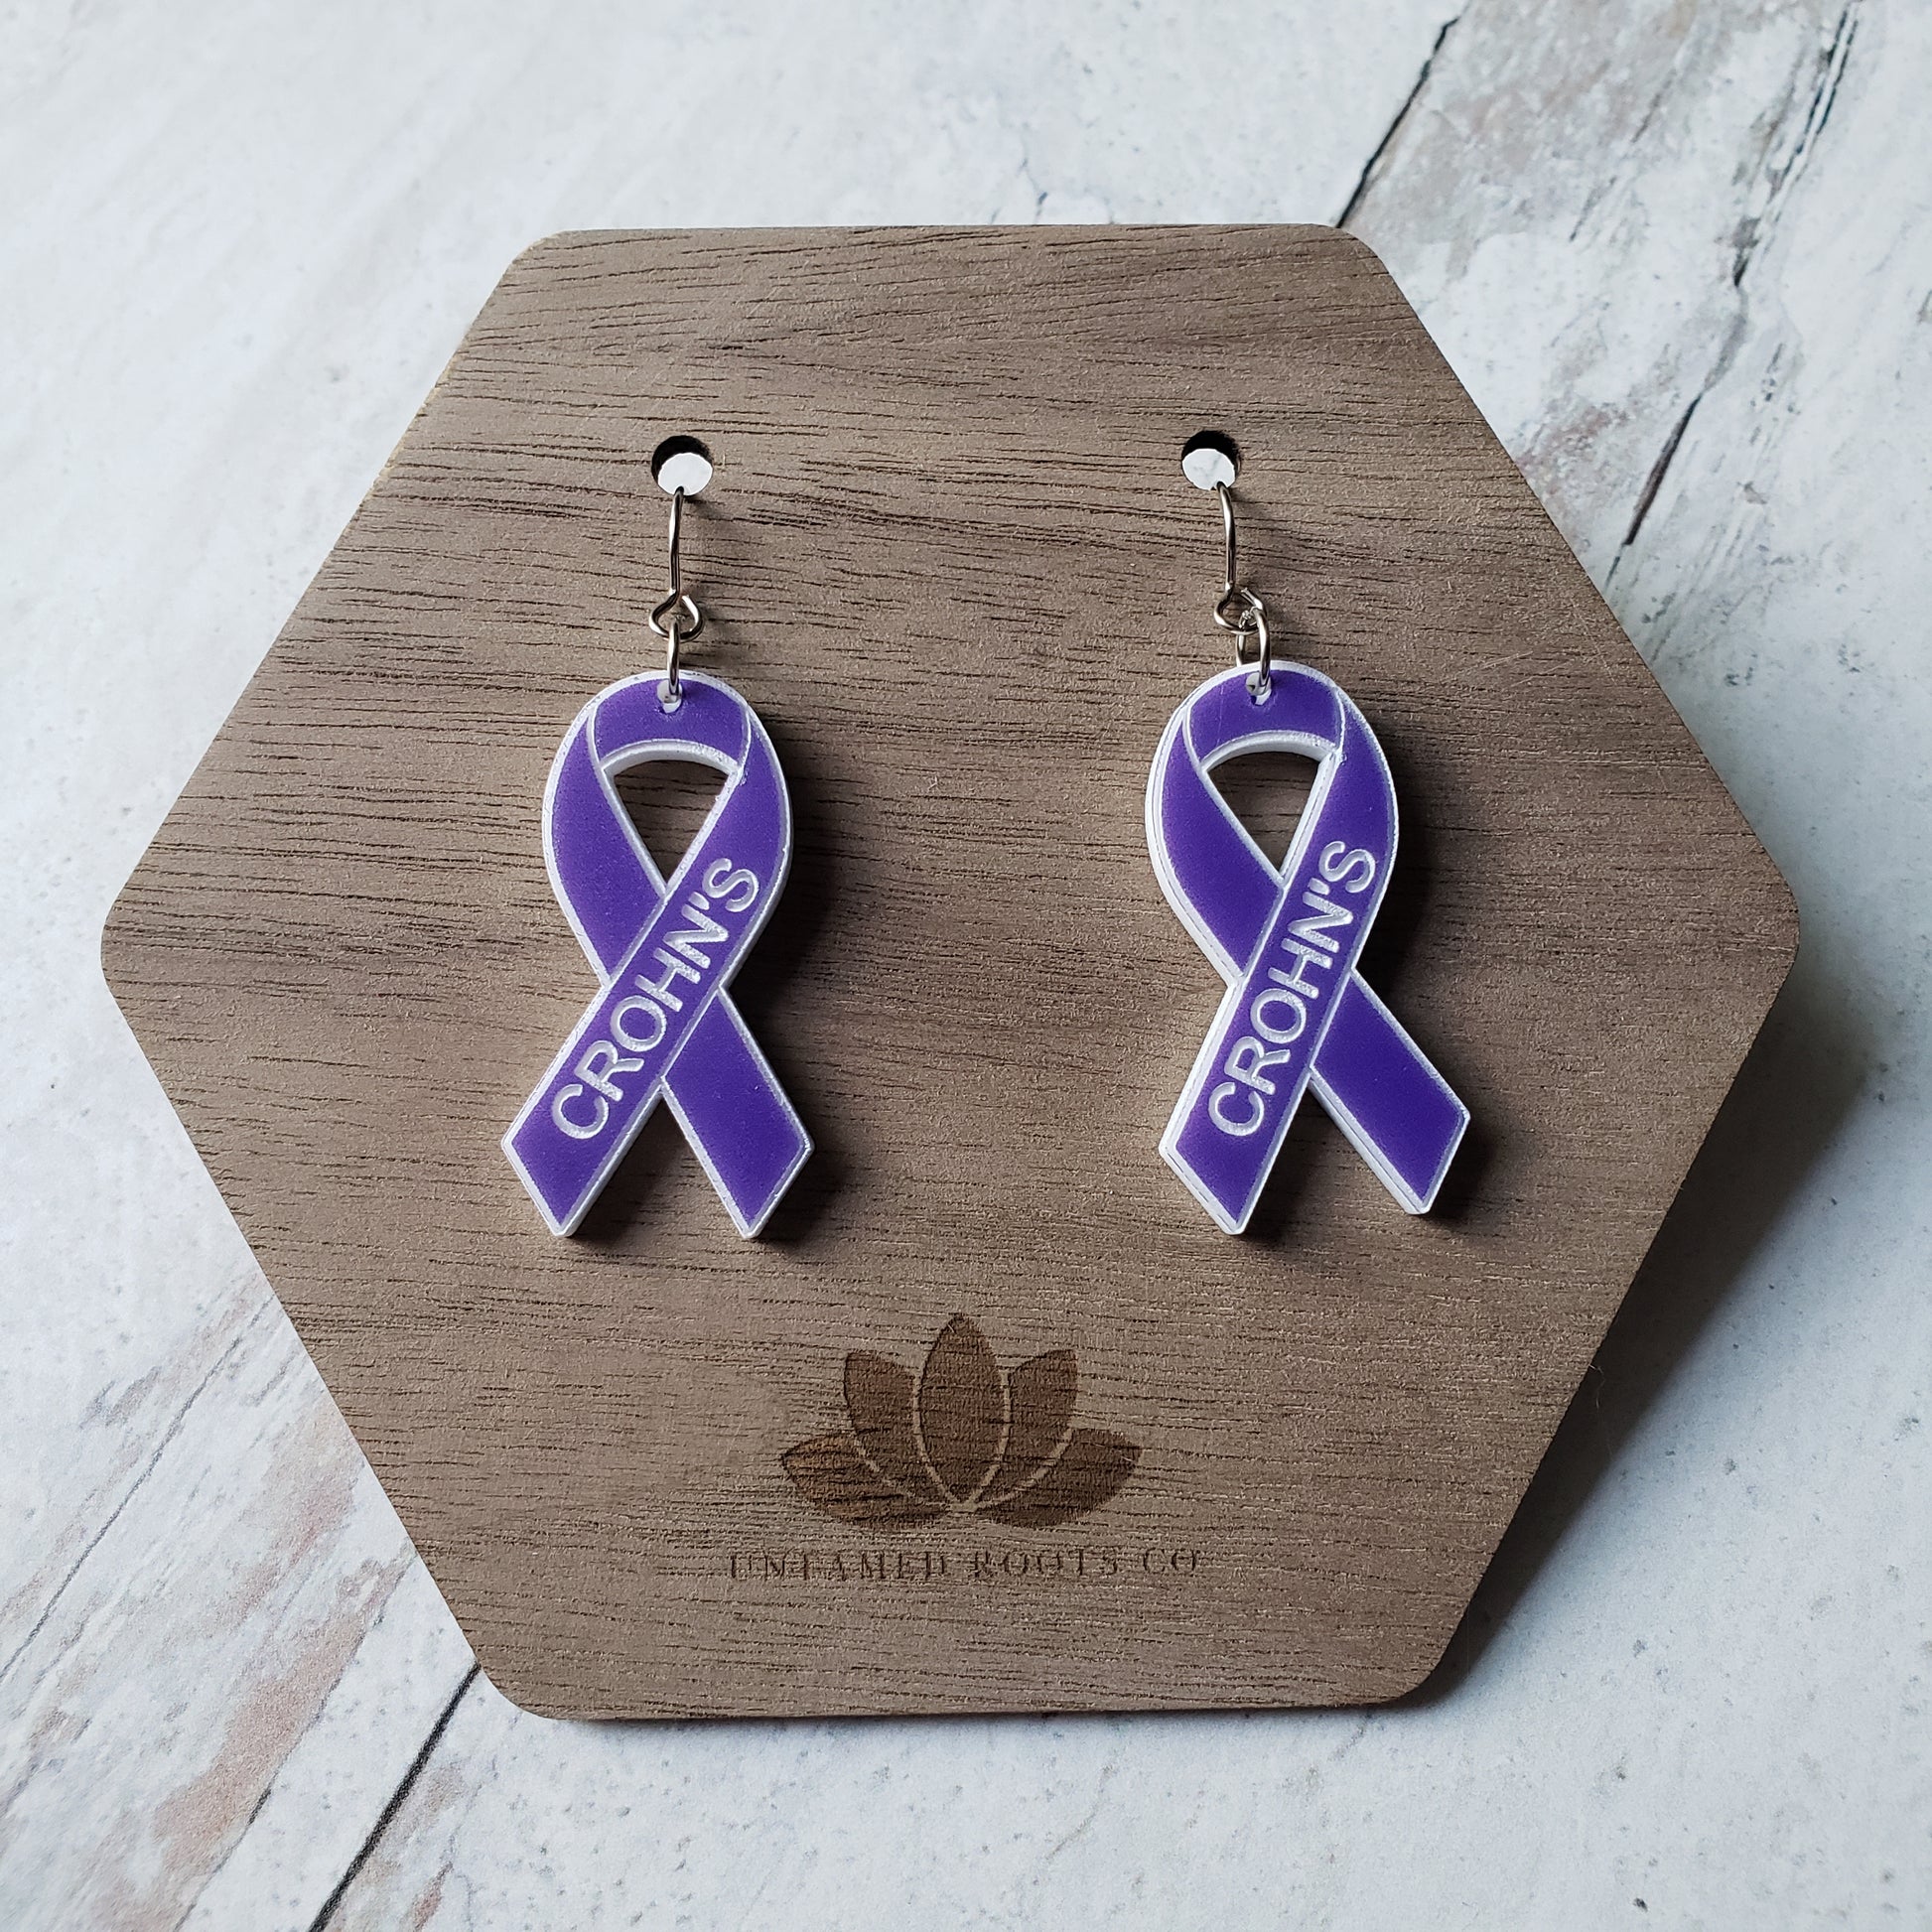 Pair of purple awareness ribbons, with engraving. Stainless steel earring wires.